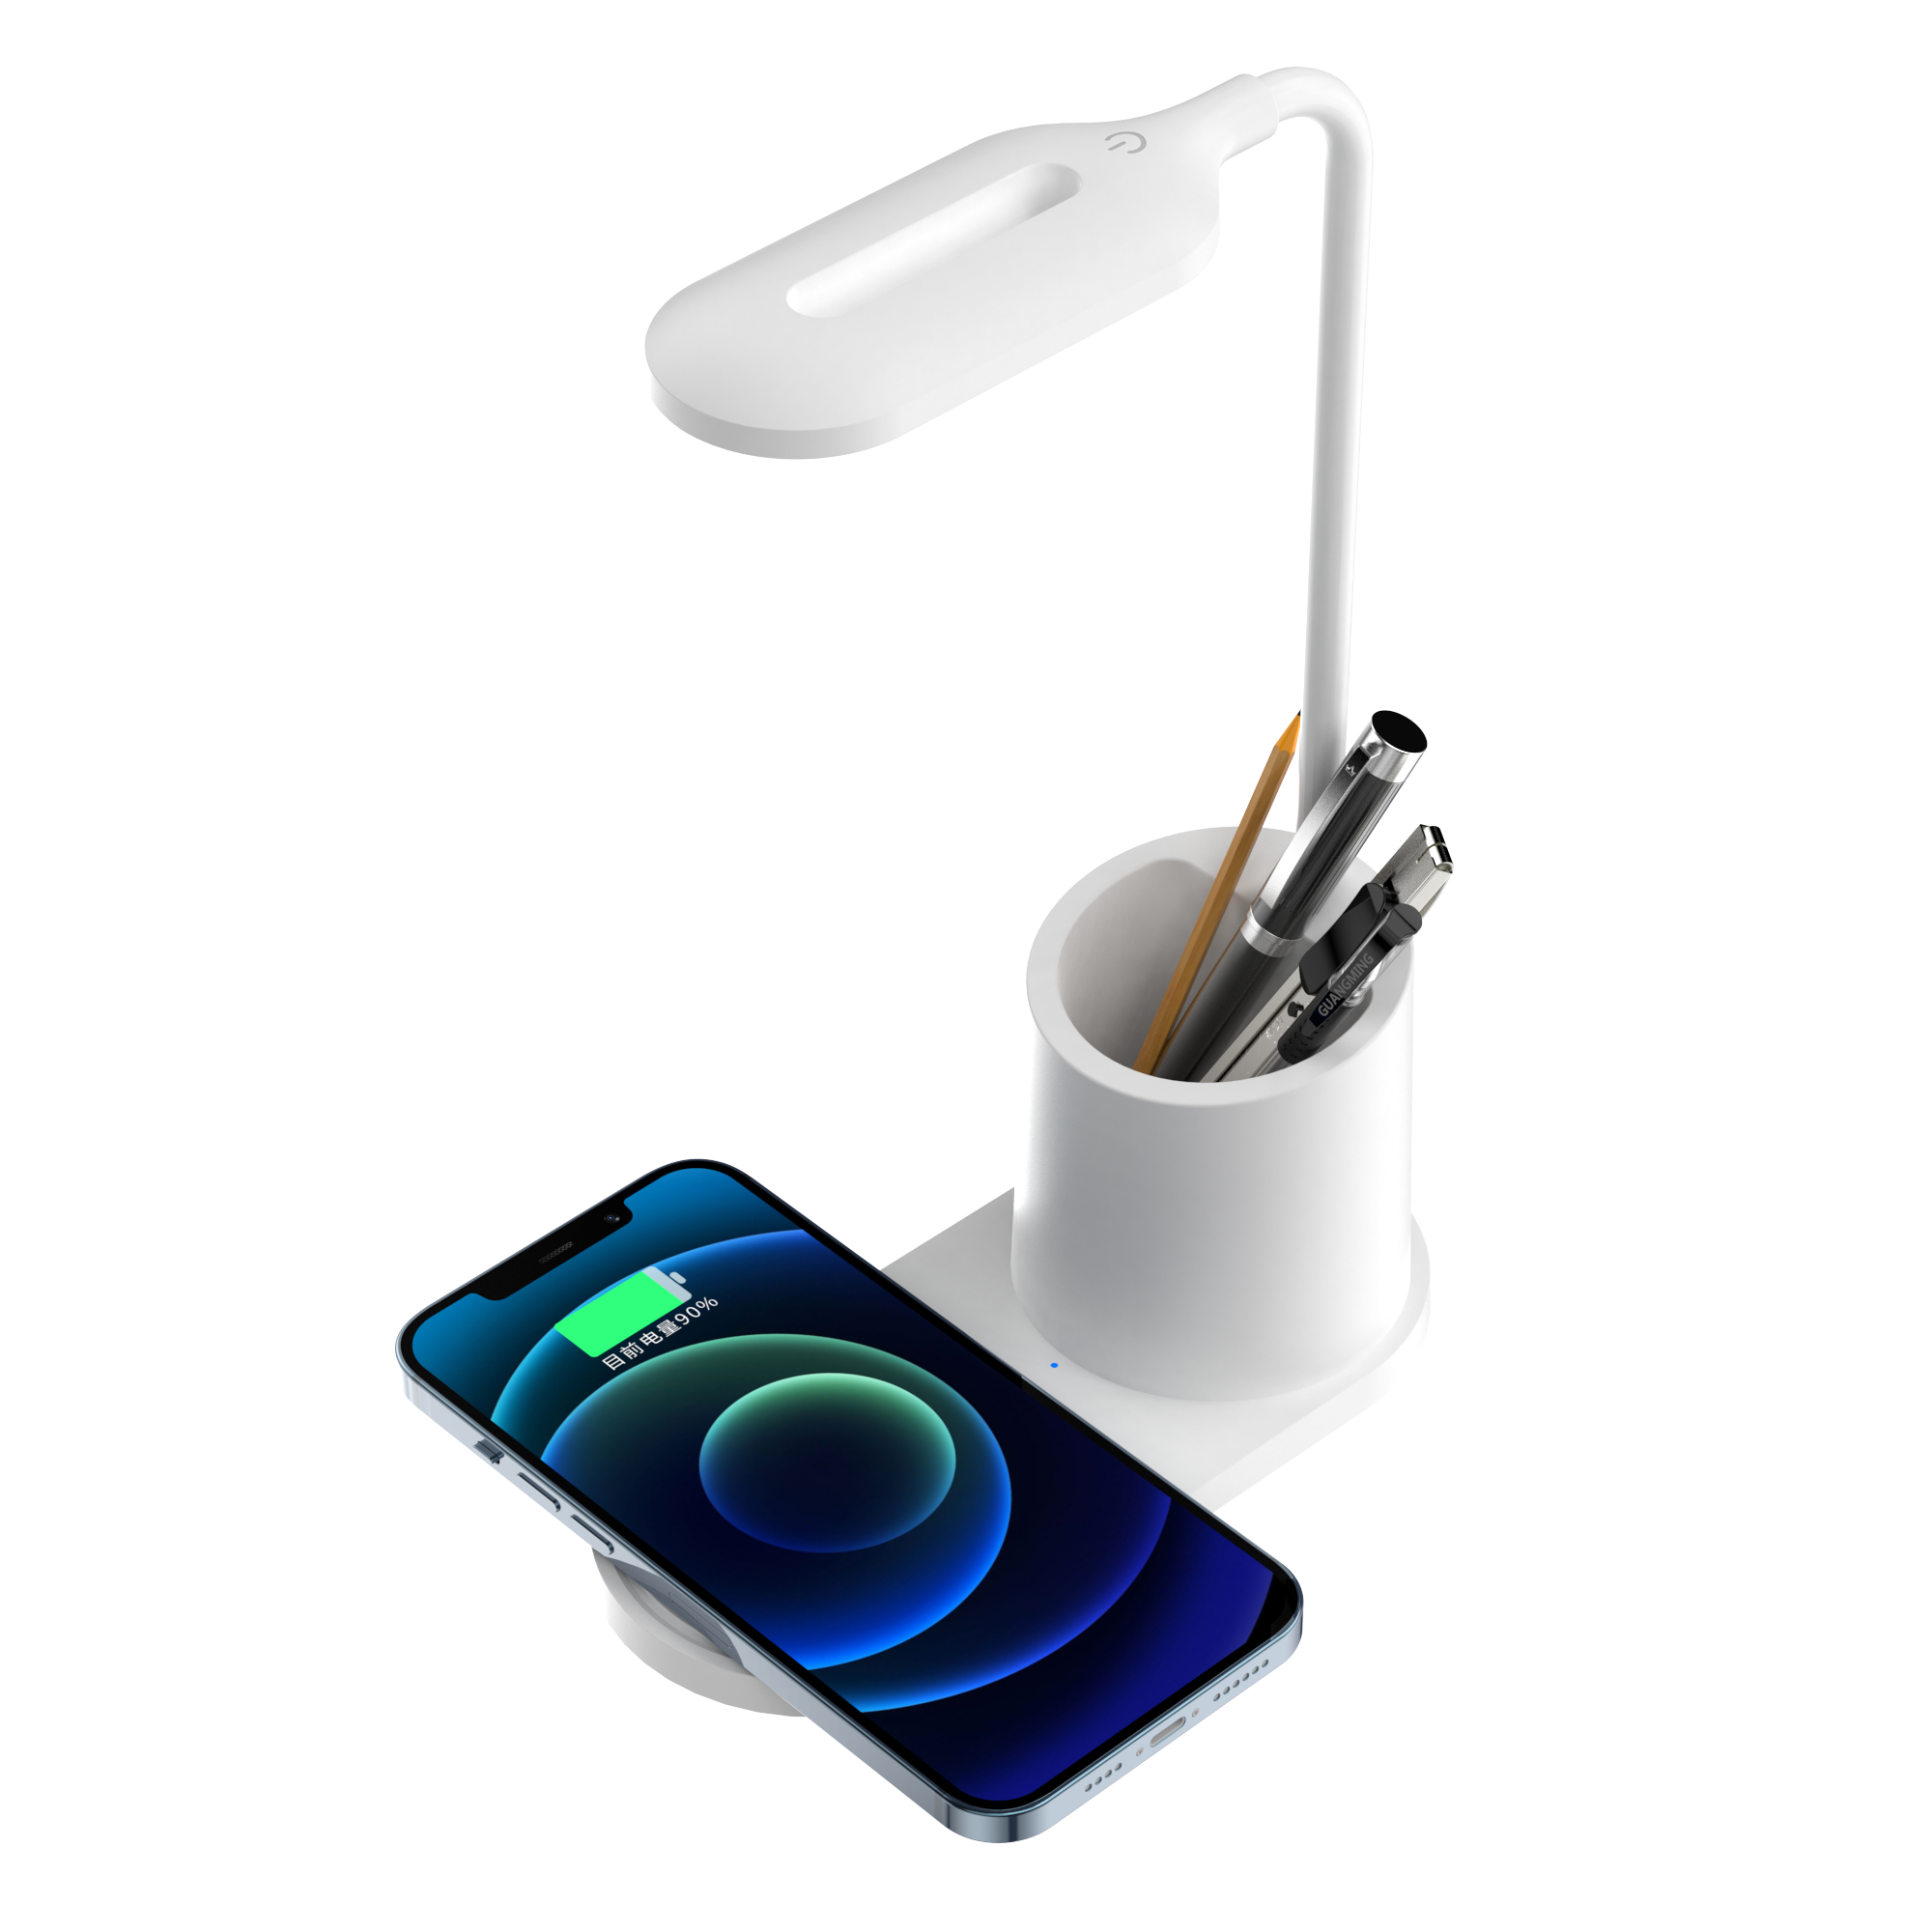 HHT513 Portable  Eye Protect Light USB Folding LED Desk Lamp With Wireless Charger Designer LED Table Lamp For Bedside Reading Room